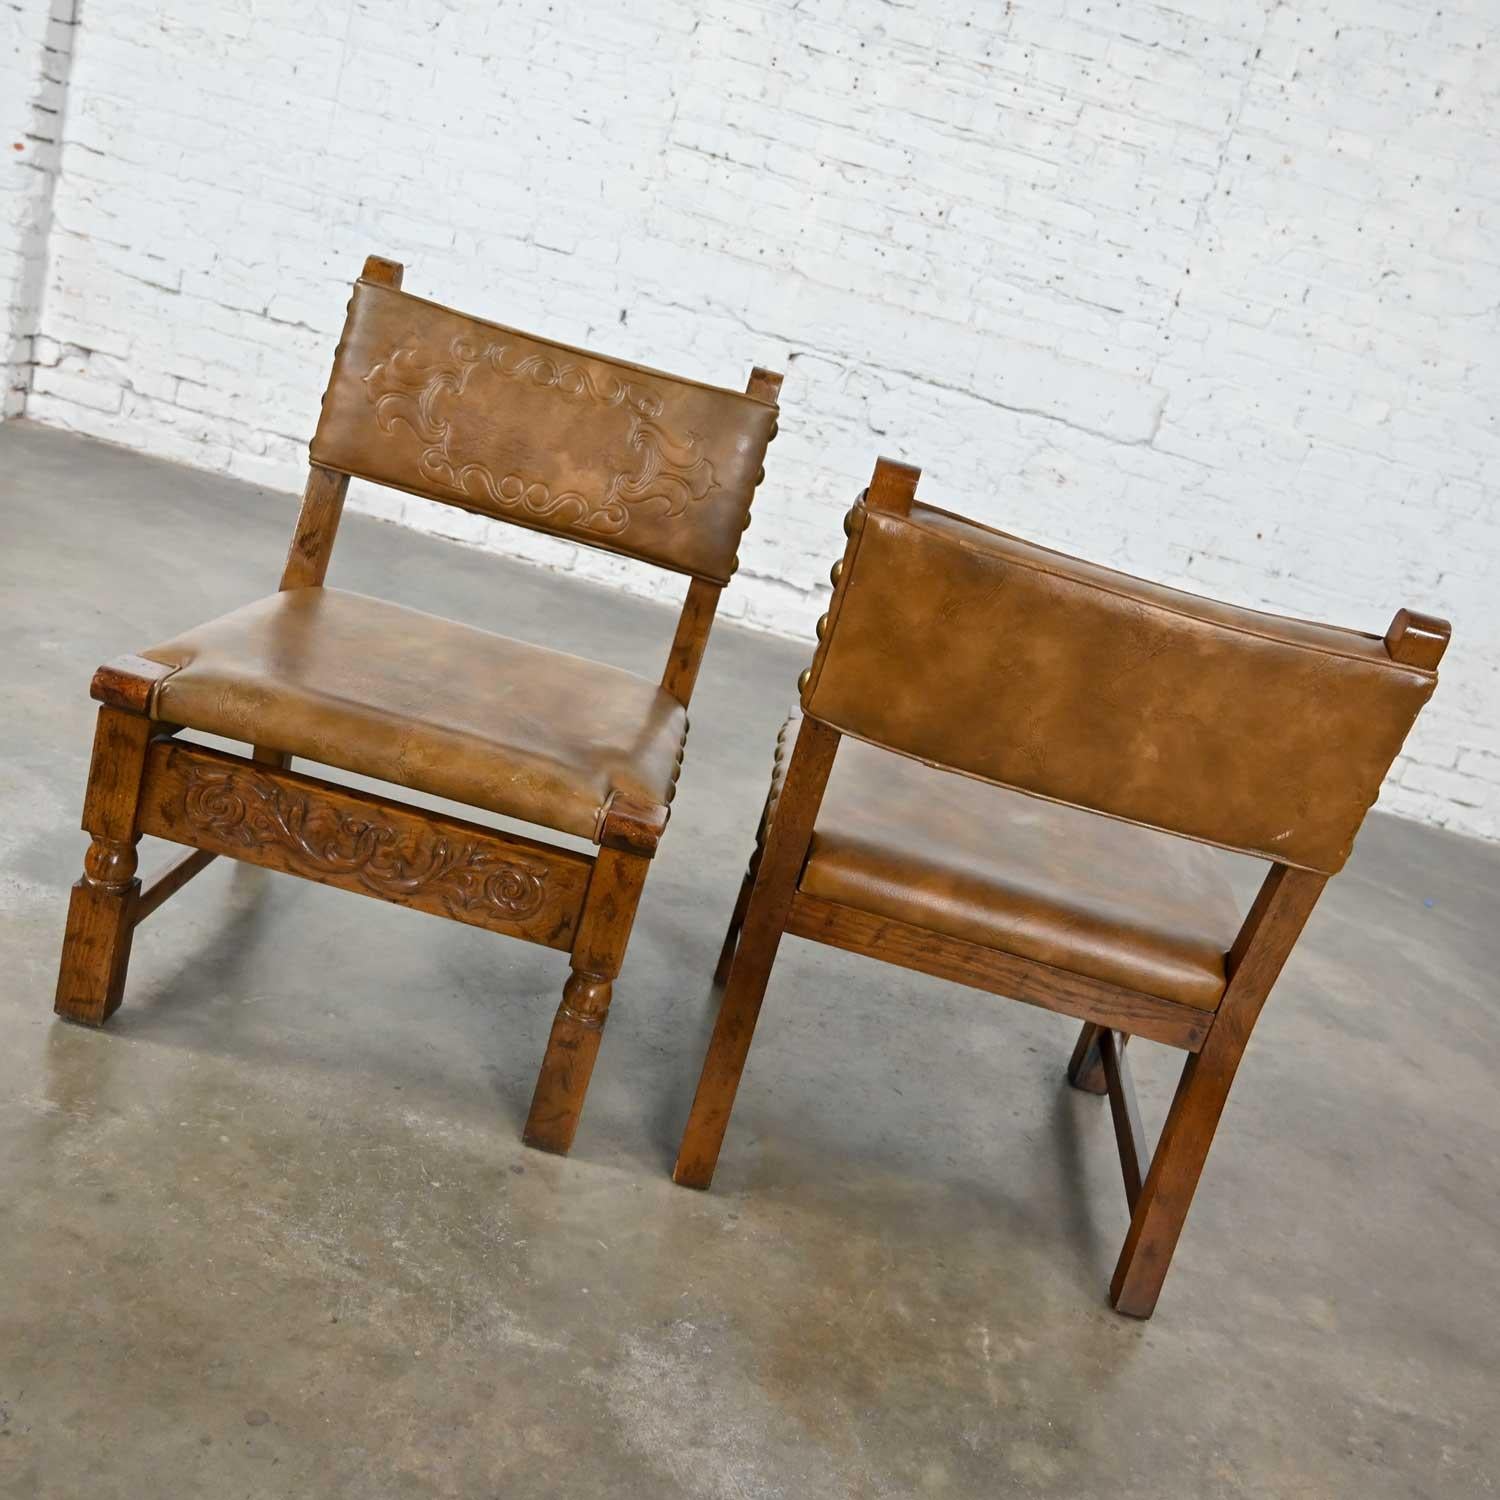 Vintage Spanish Revival Oak Pair of Chairs with Tooled Cognac Faux Leather Seat In Good Condition For Sale In Topeka, KS